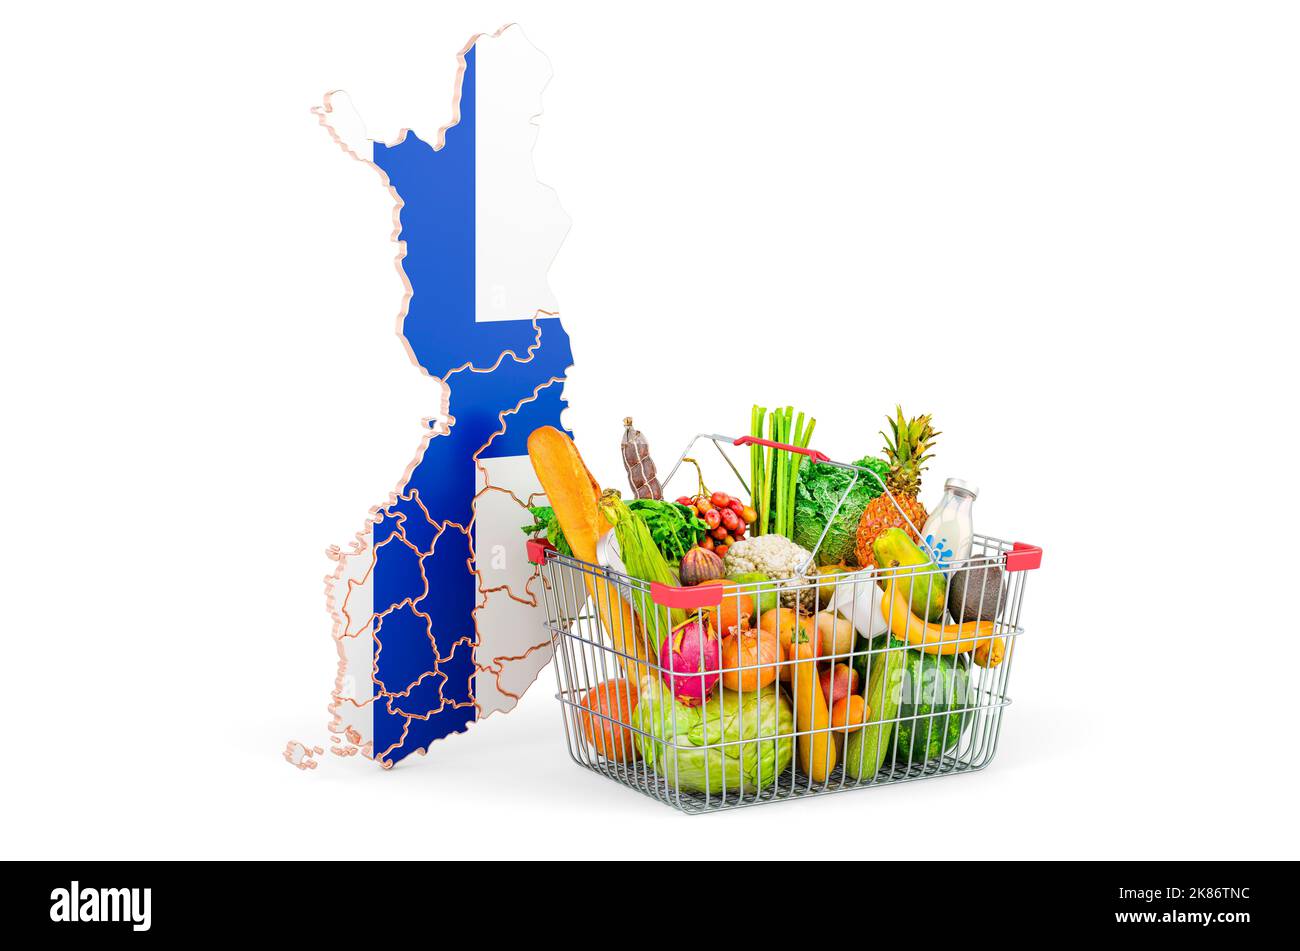 Purchasing power and market basket in Finland concept. Shopping basket with Finnish map, 3D rendering isolated on white background Stock Photo